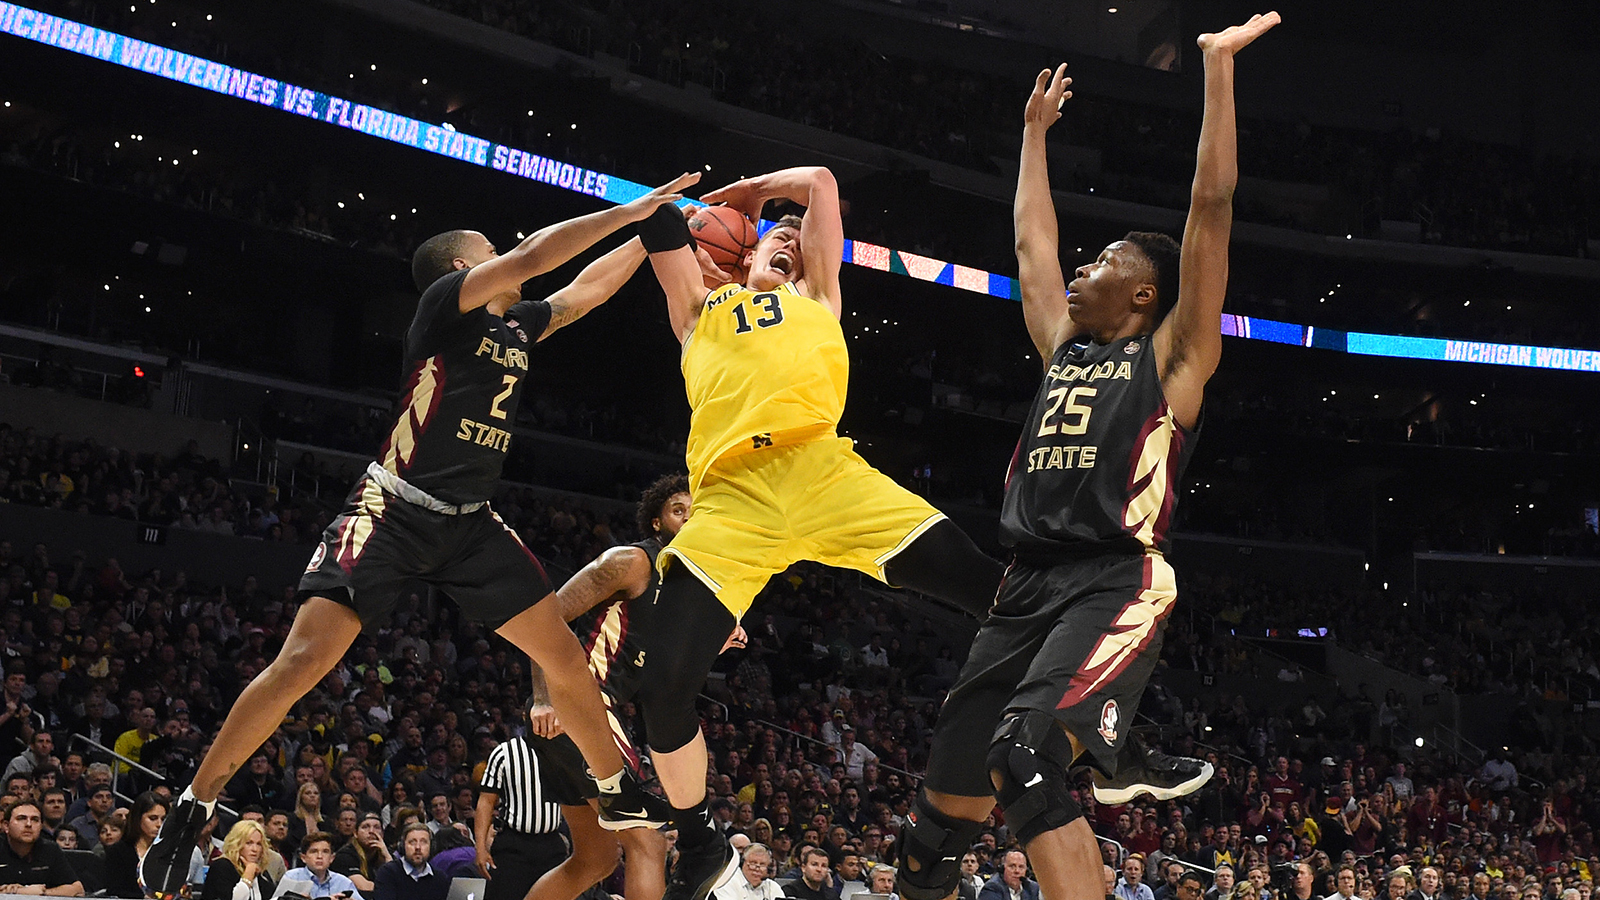 End of the road: FSU's NCAA Tournament run comes to an close with Elite Eight loss to Michigan